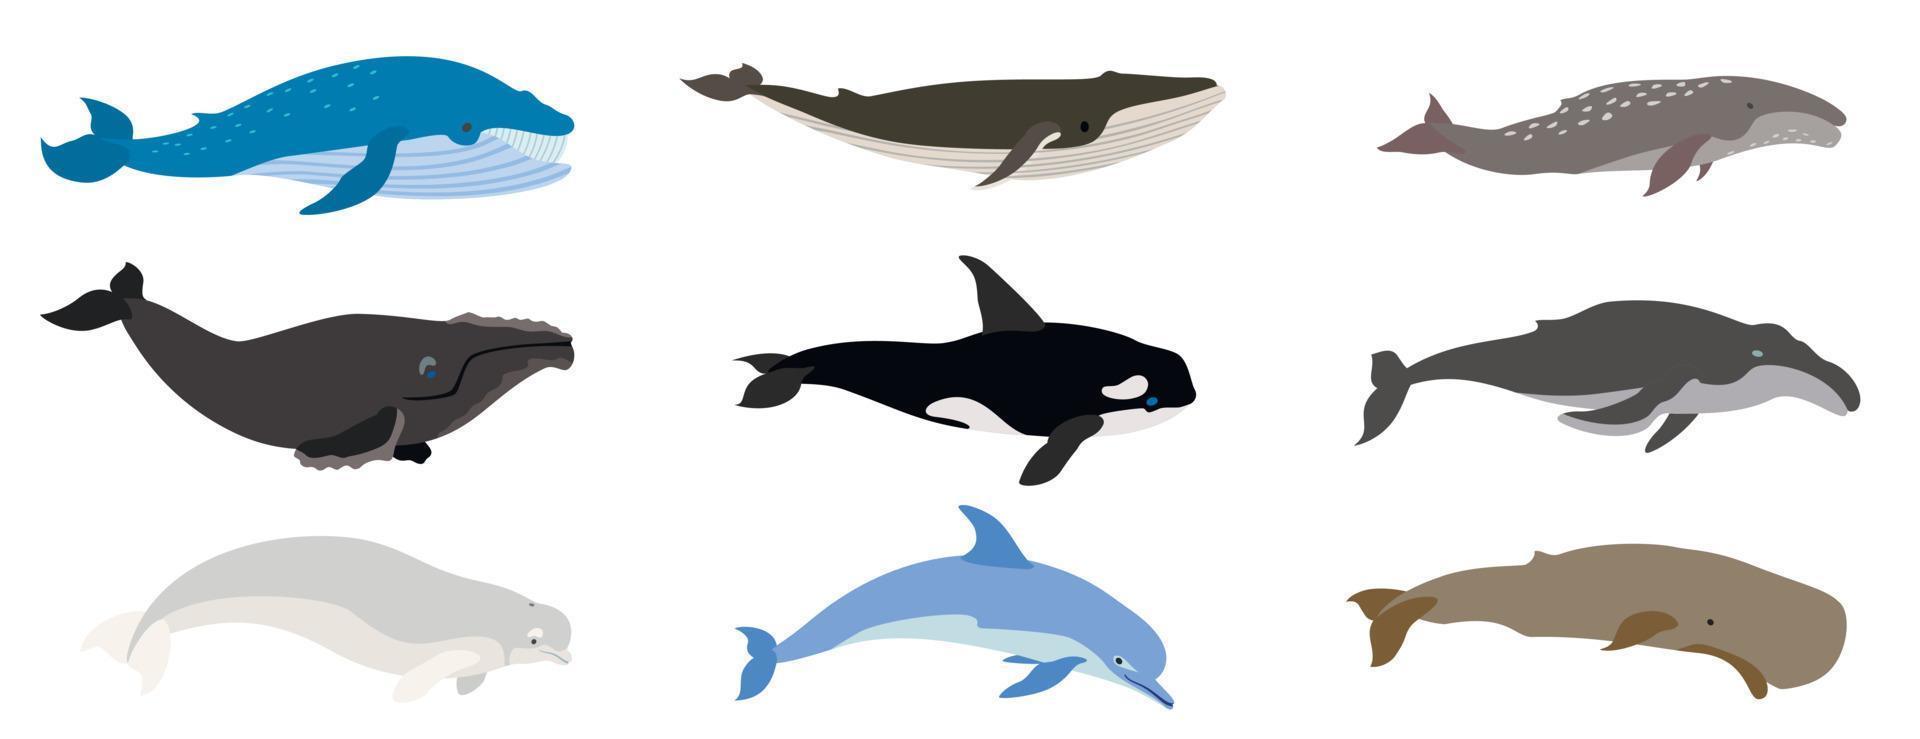 Whale icons set, flat style vector